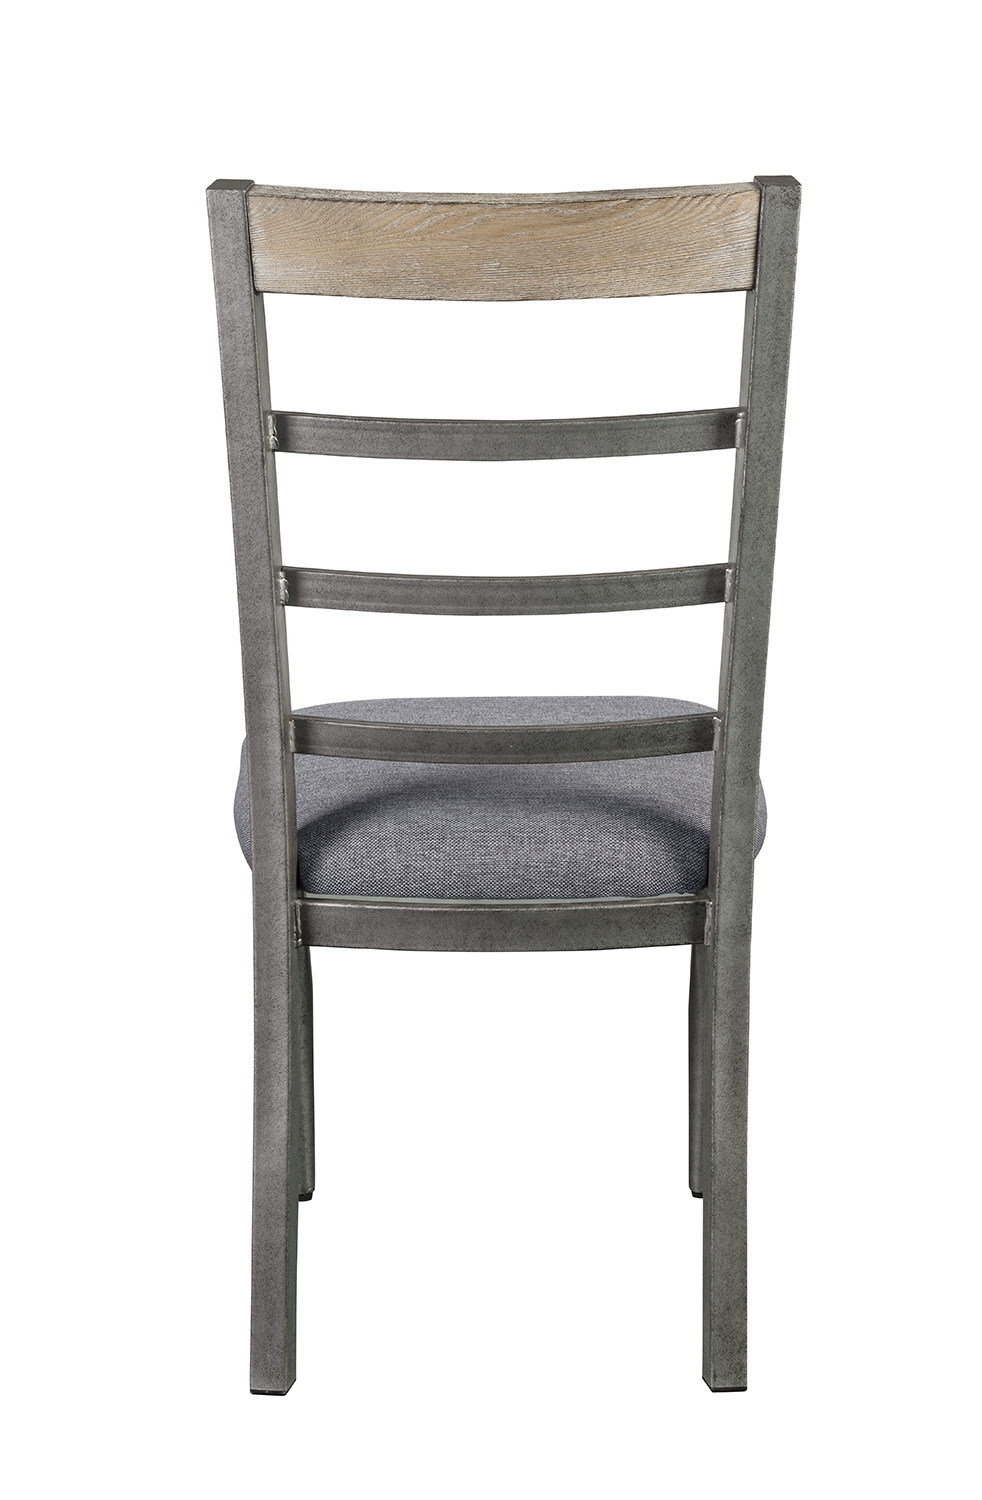 Acme Ornat Side Chair - Gray Fabric/Antique Gray